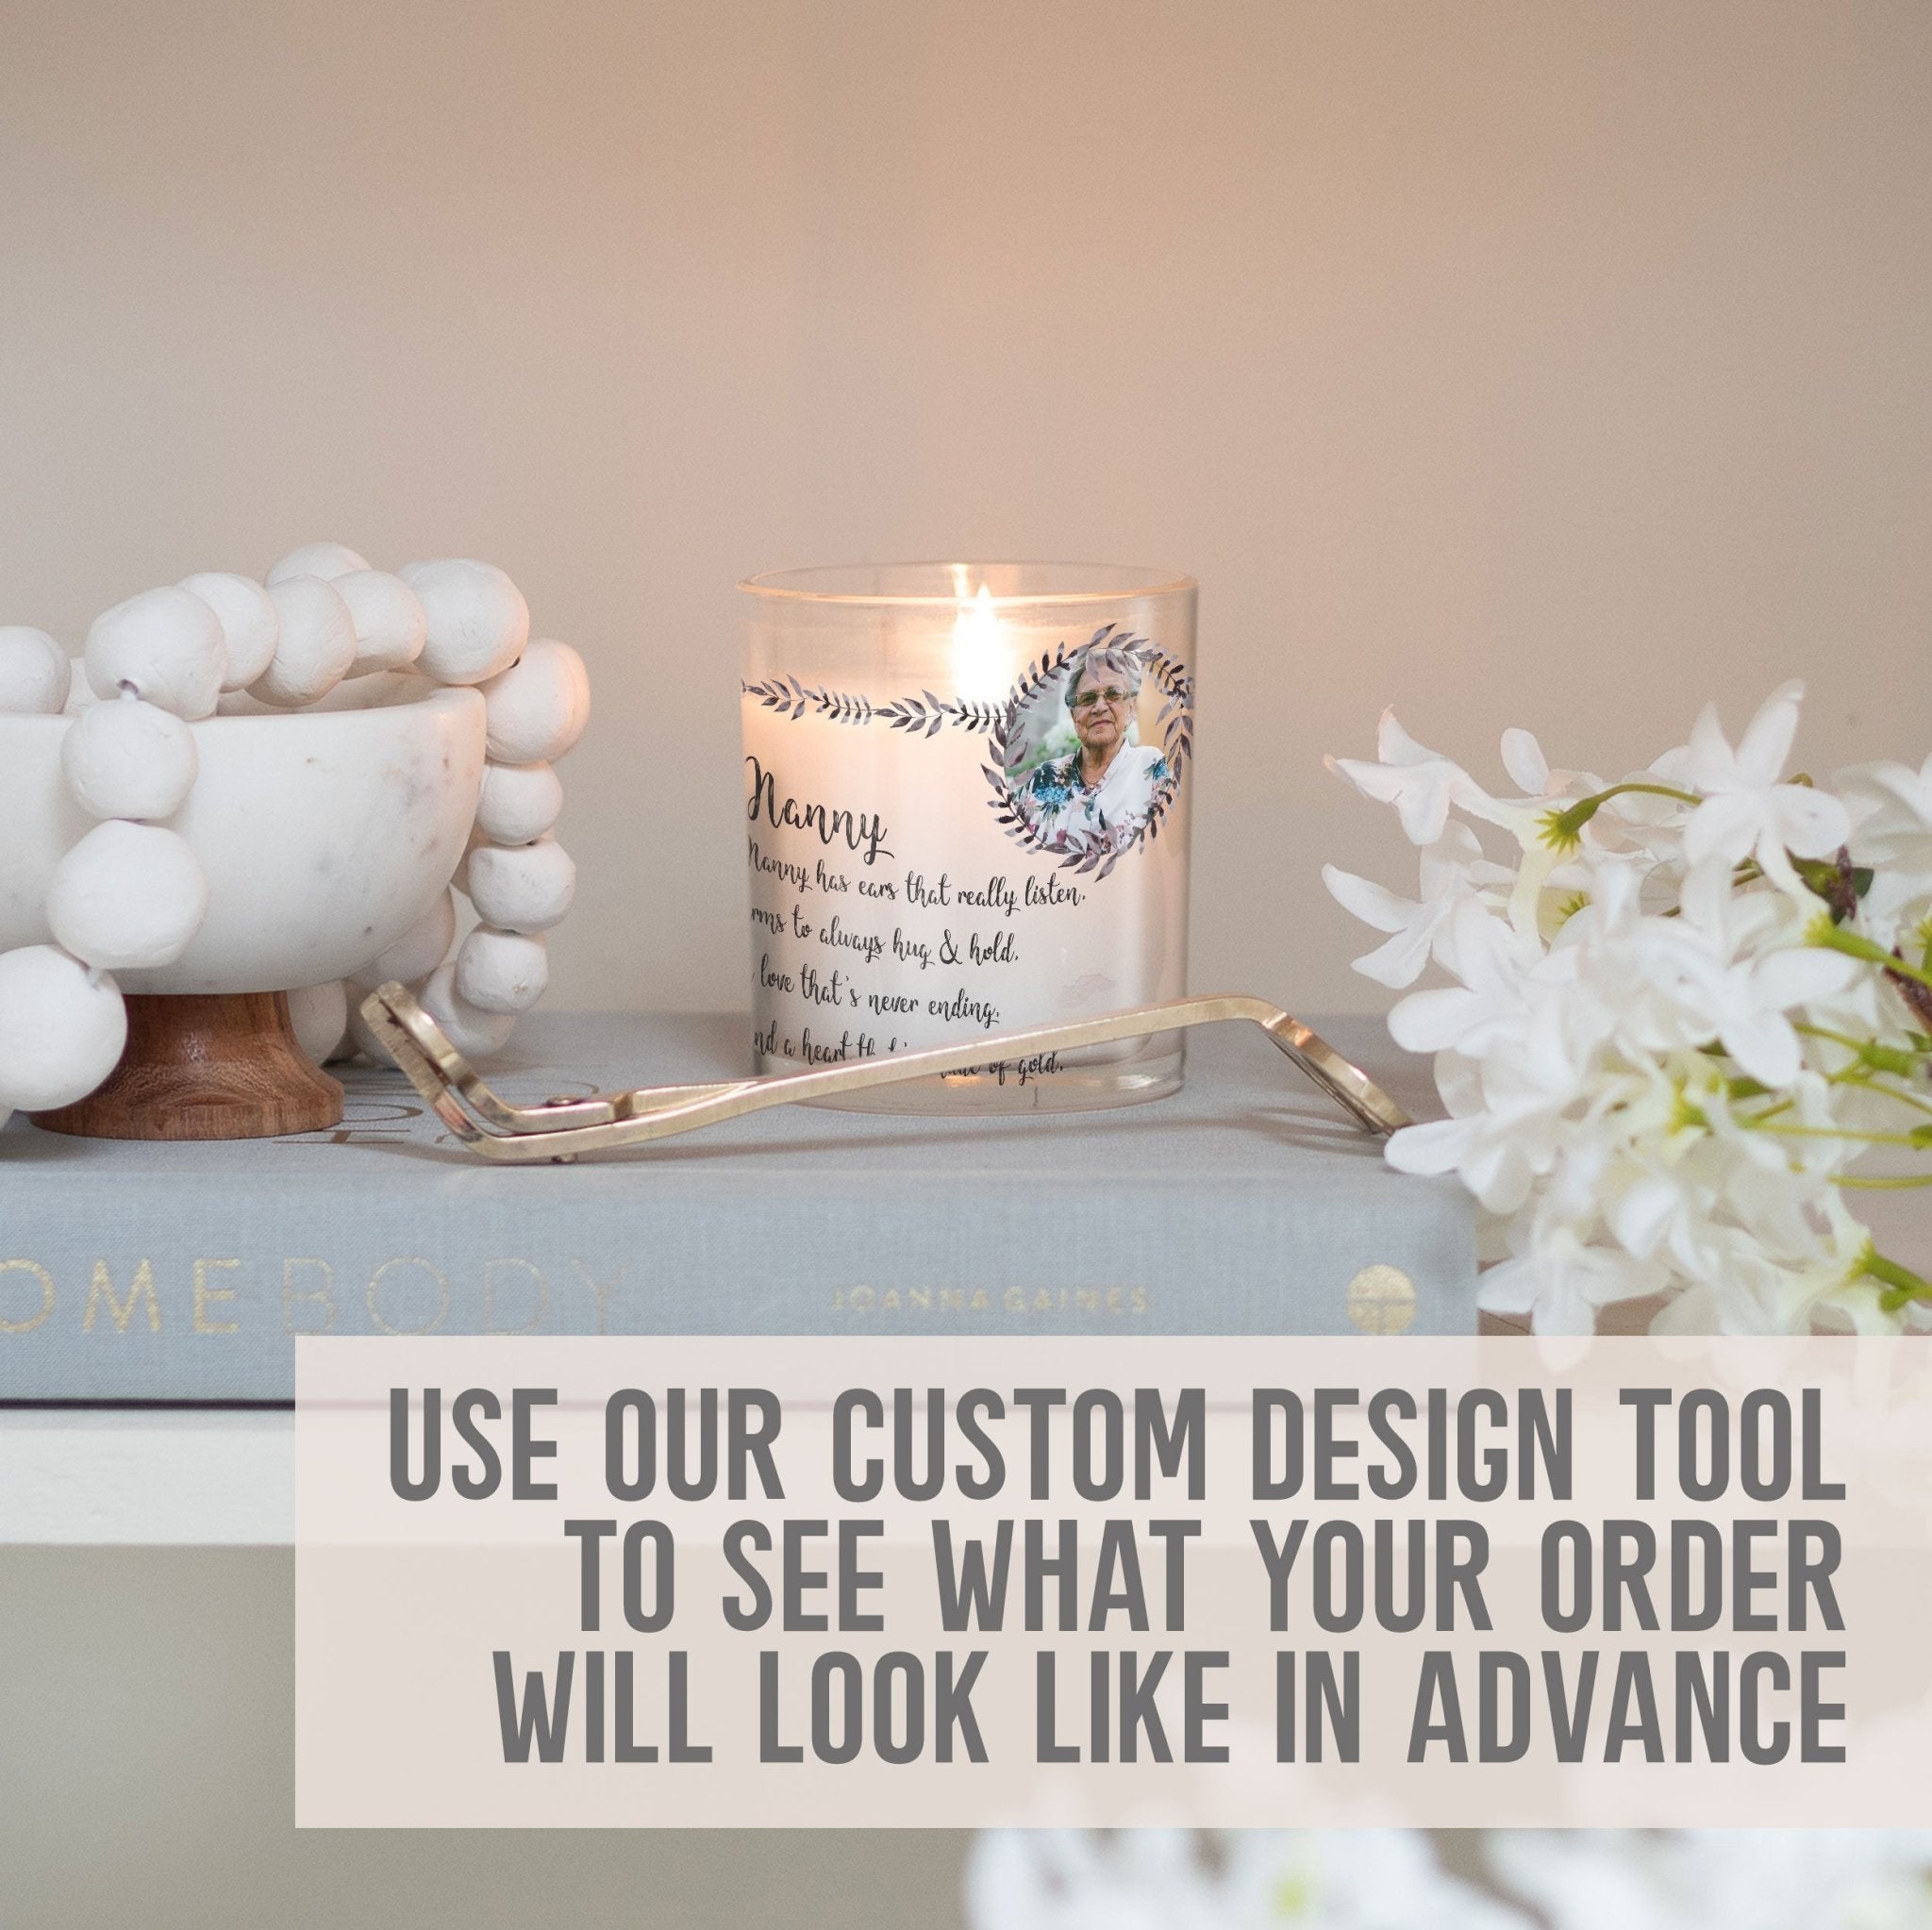 Nanny Quotes Custom Photo Candle Holder | Rustic Wreath Nursemaid Gift Ideas | Personalized Votive Glass with Picture | Home Decor Present Candleholder - Unique Prints